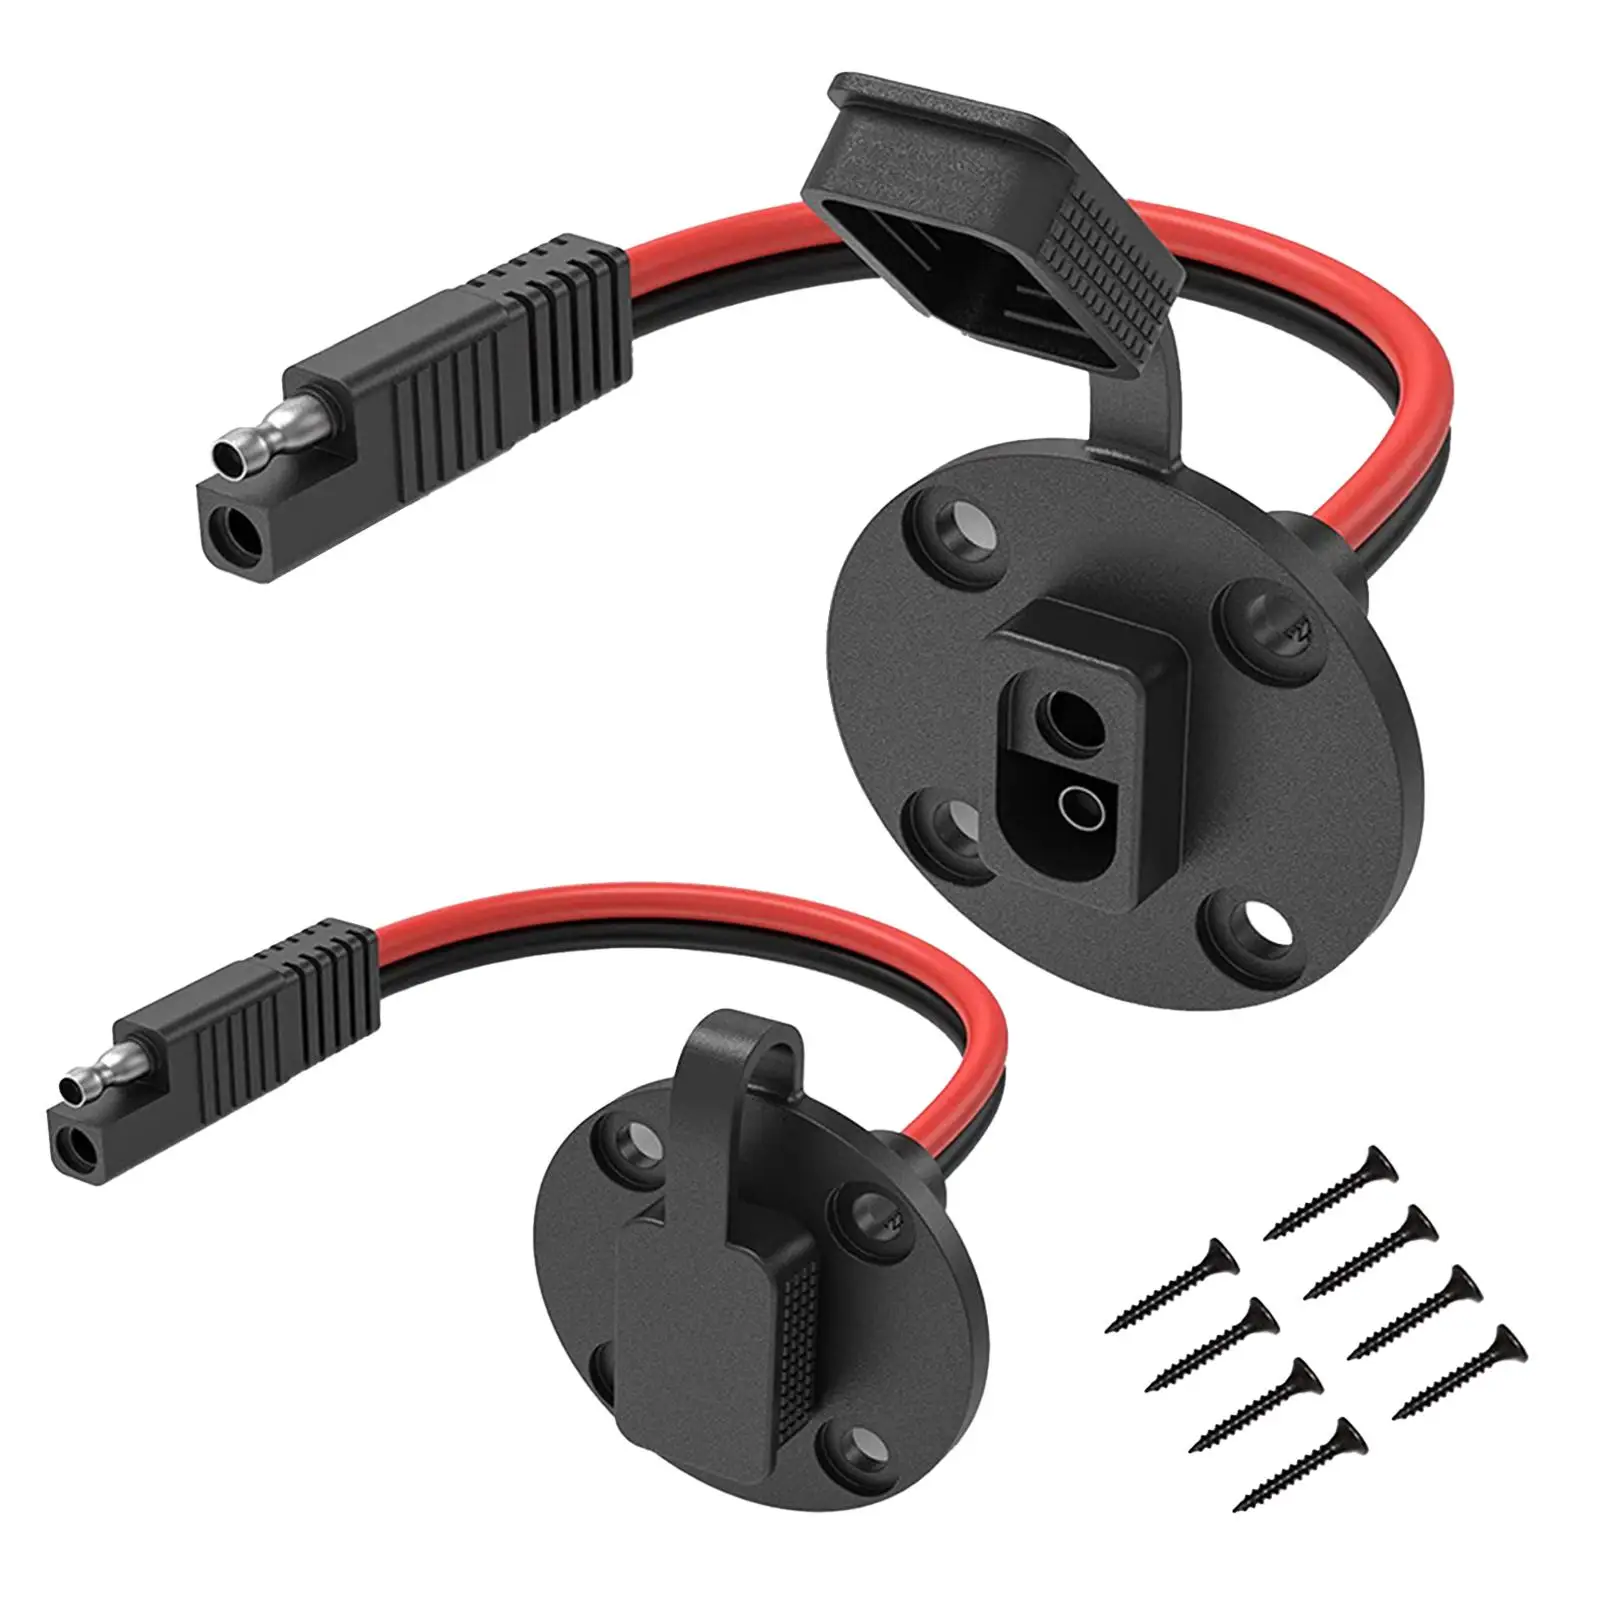 2x SAE Socket Cars Quick Connect Disconnect Accessories RV 12AWG Boats Heavy Duty Connector Cables Sidewall Port Battery Cables